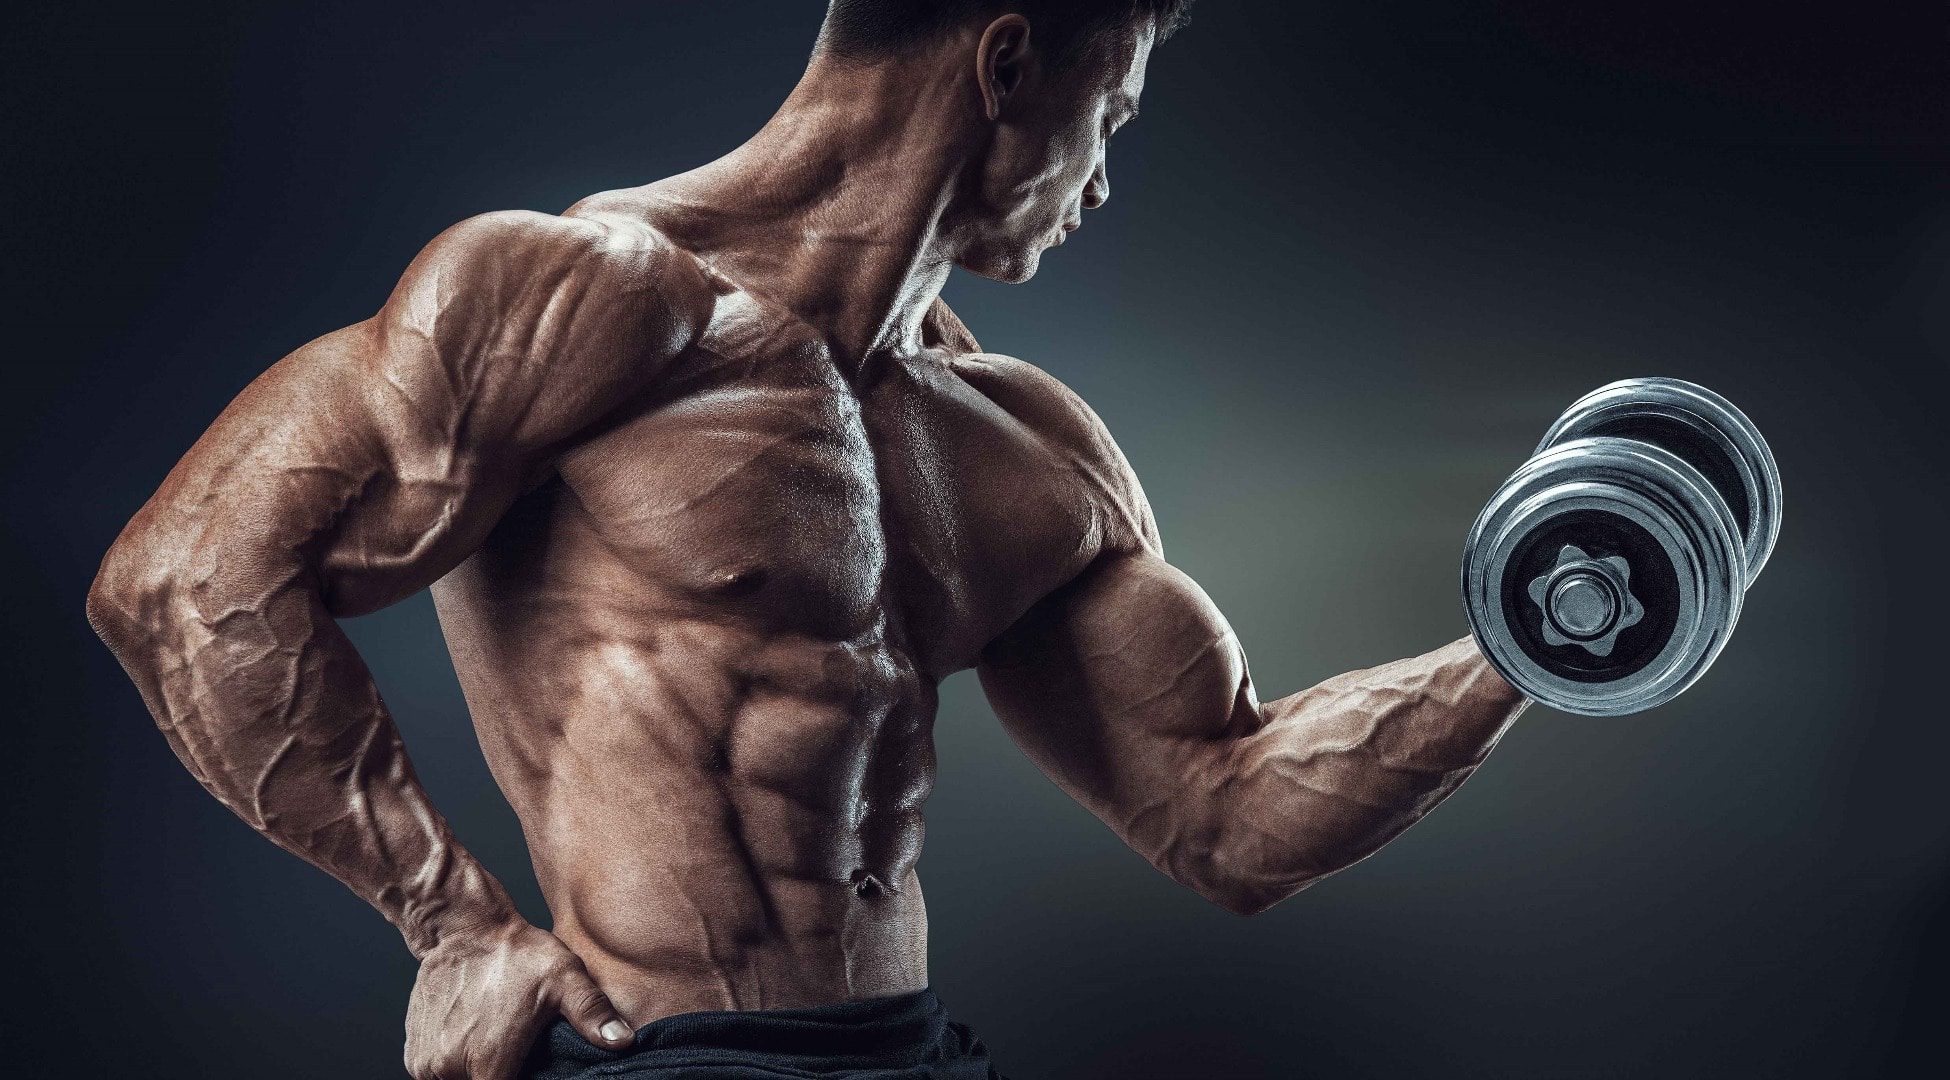 Deload: How To Break Your Plateau And Start Building Muscle Again